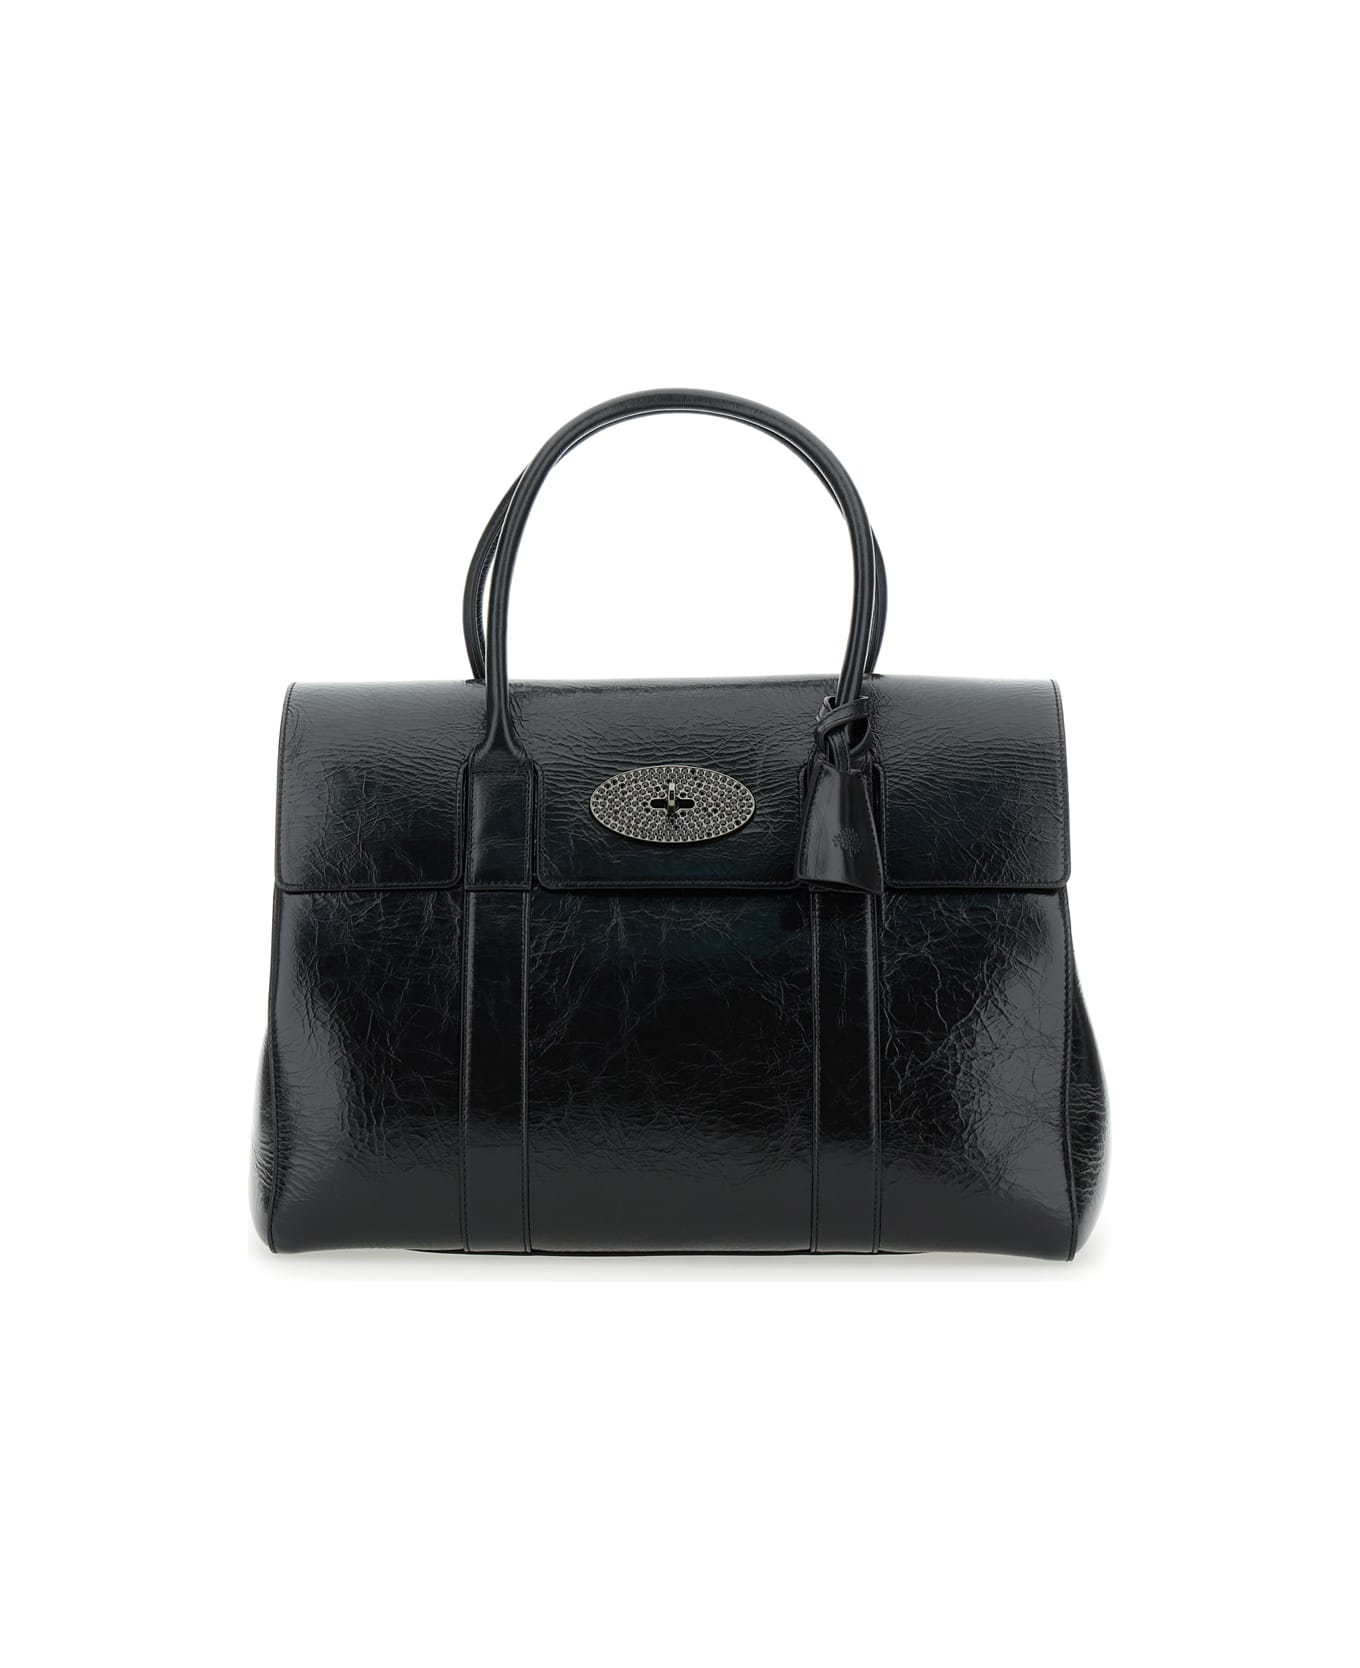 Mulberry 'bayswater' Black Handbag With Postman's Lock Closure In Leather Woman - Black トートバッグ